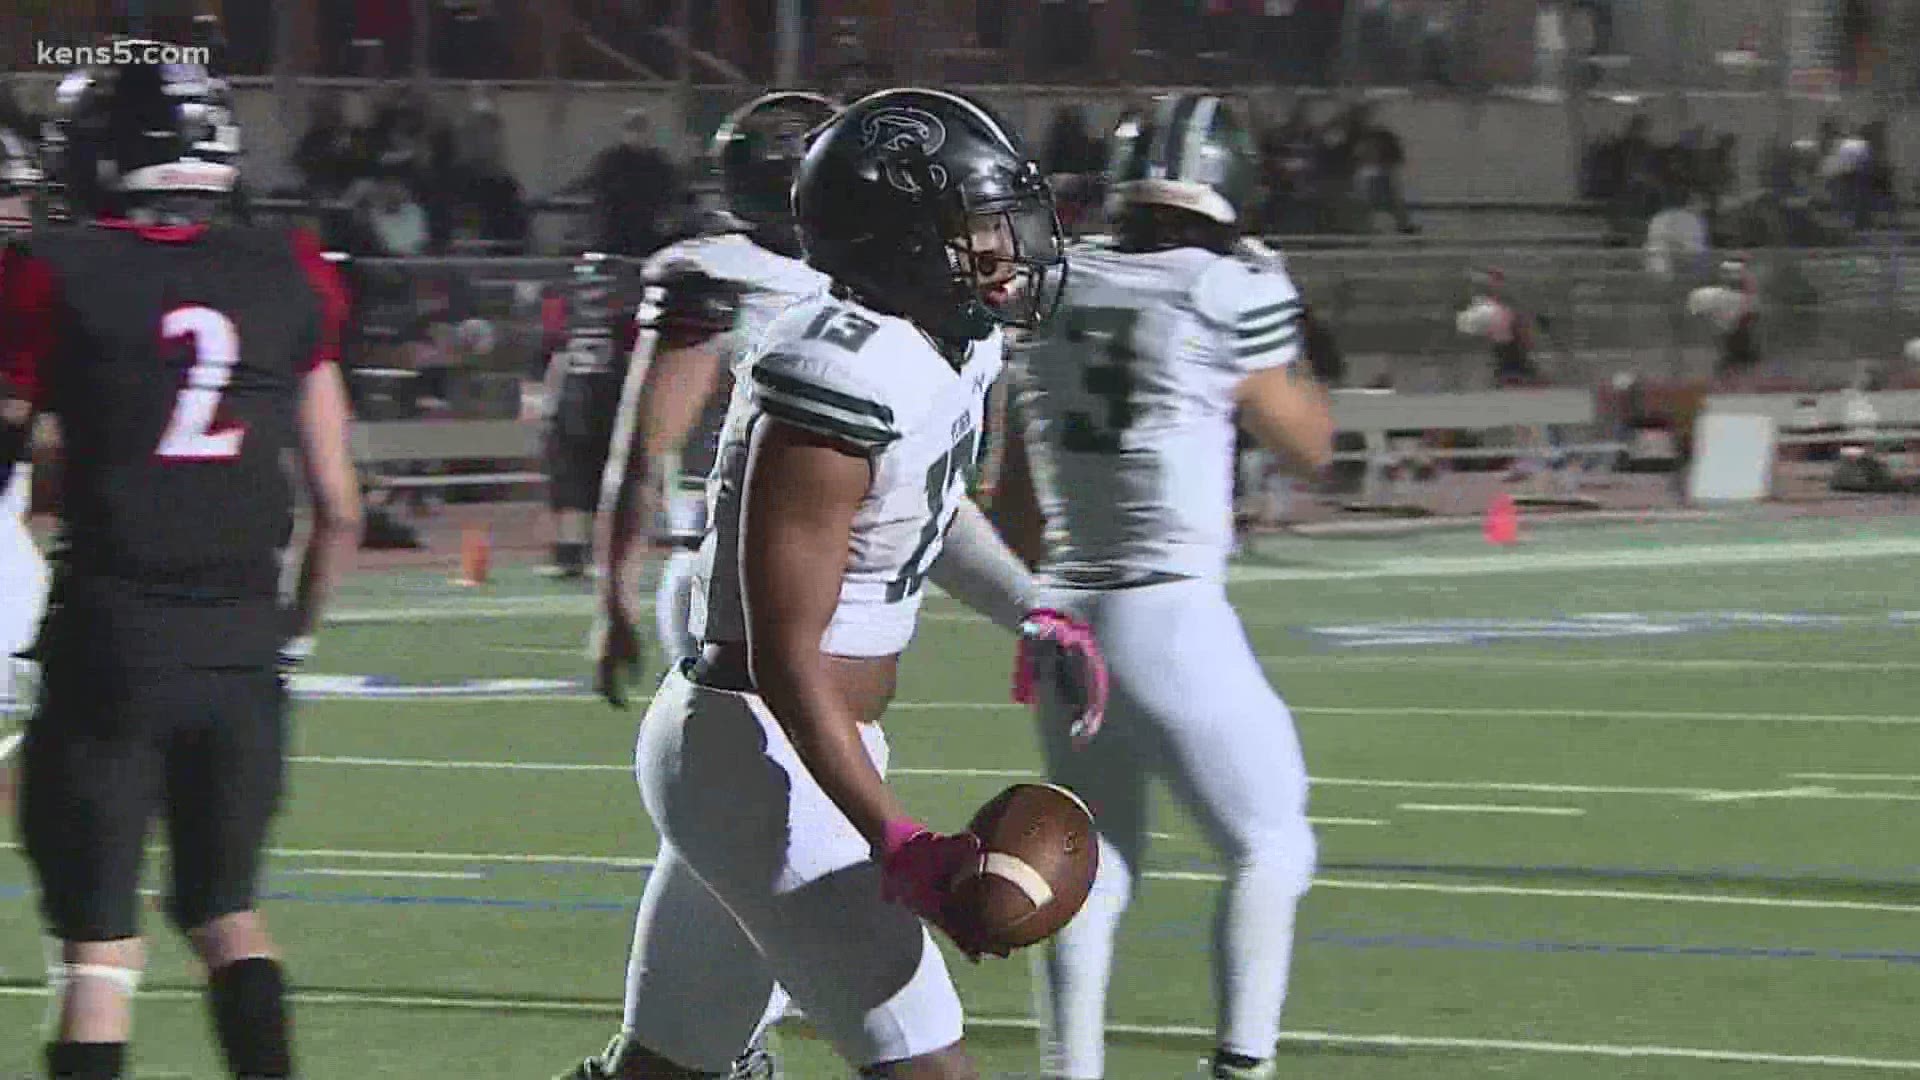 Reagan cruised to a win over Churchill as part of Friday night's high school action in the San Antonio area.